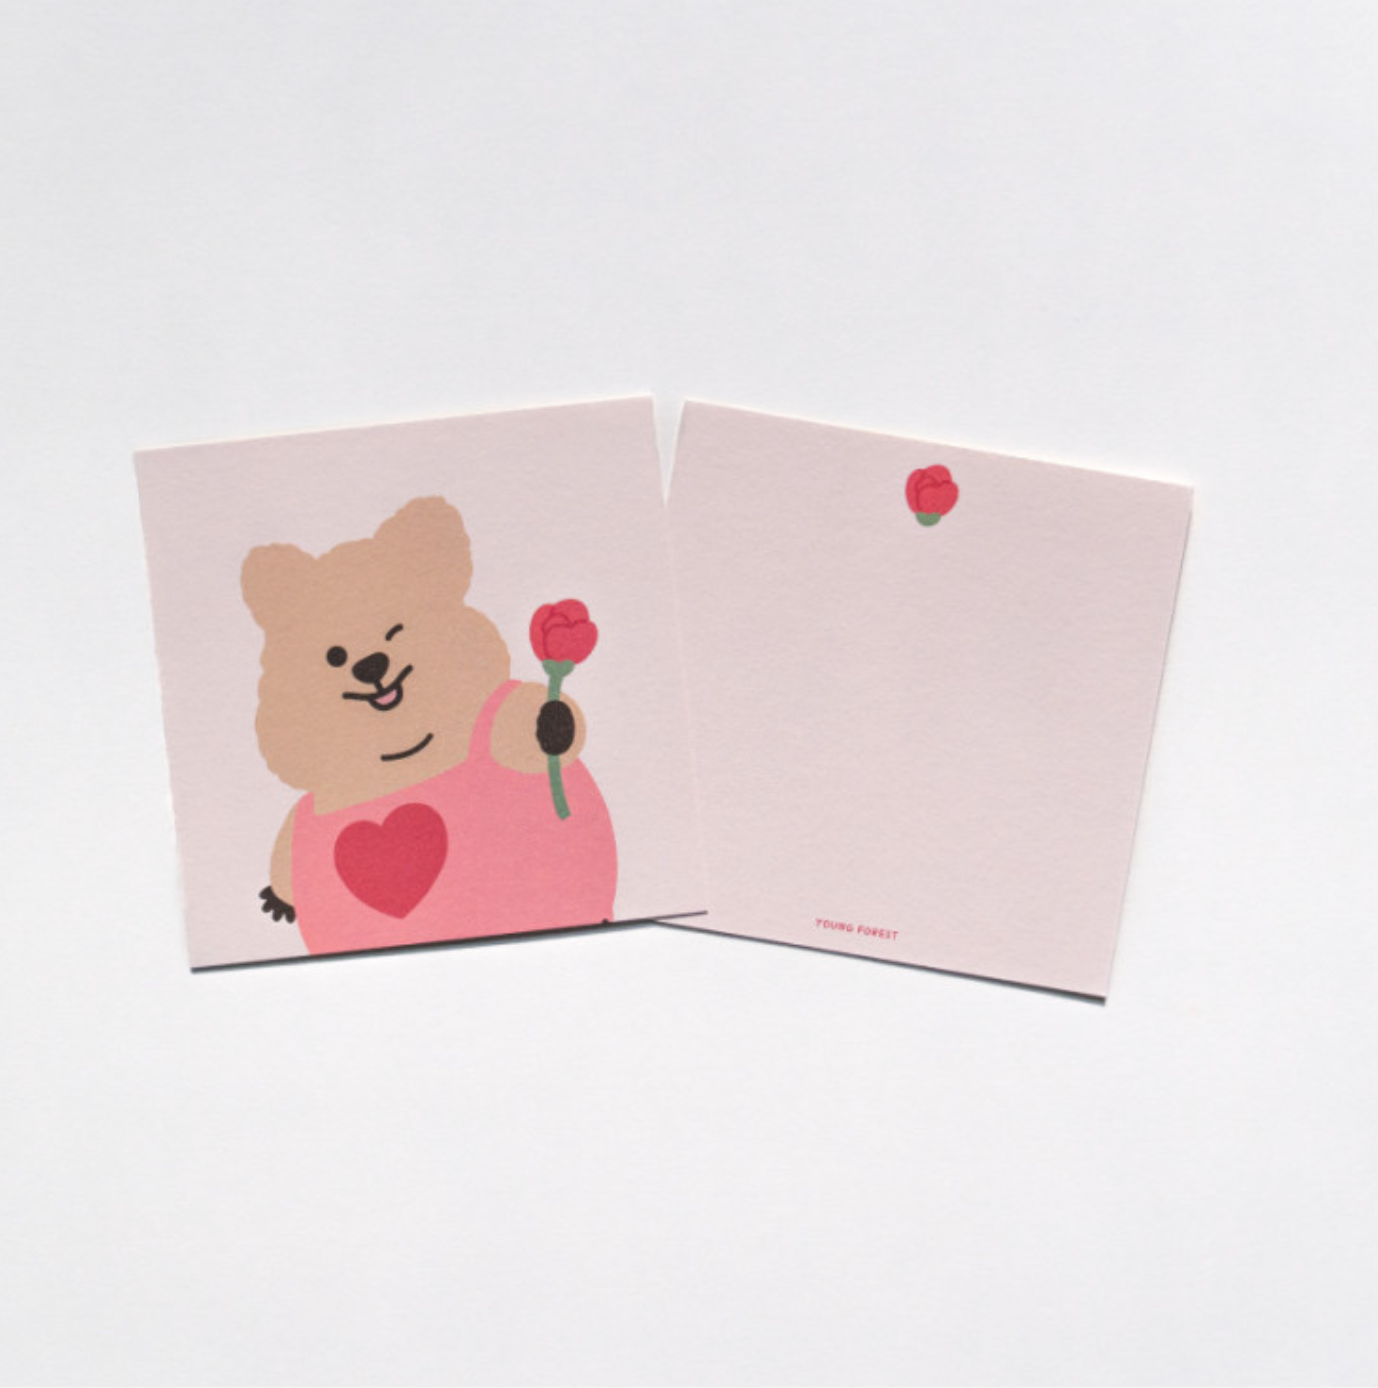 [YOUNG FOREST] Flower Quokka Postcard